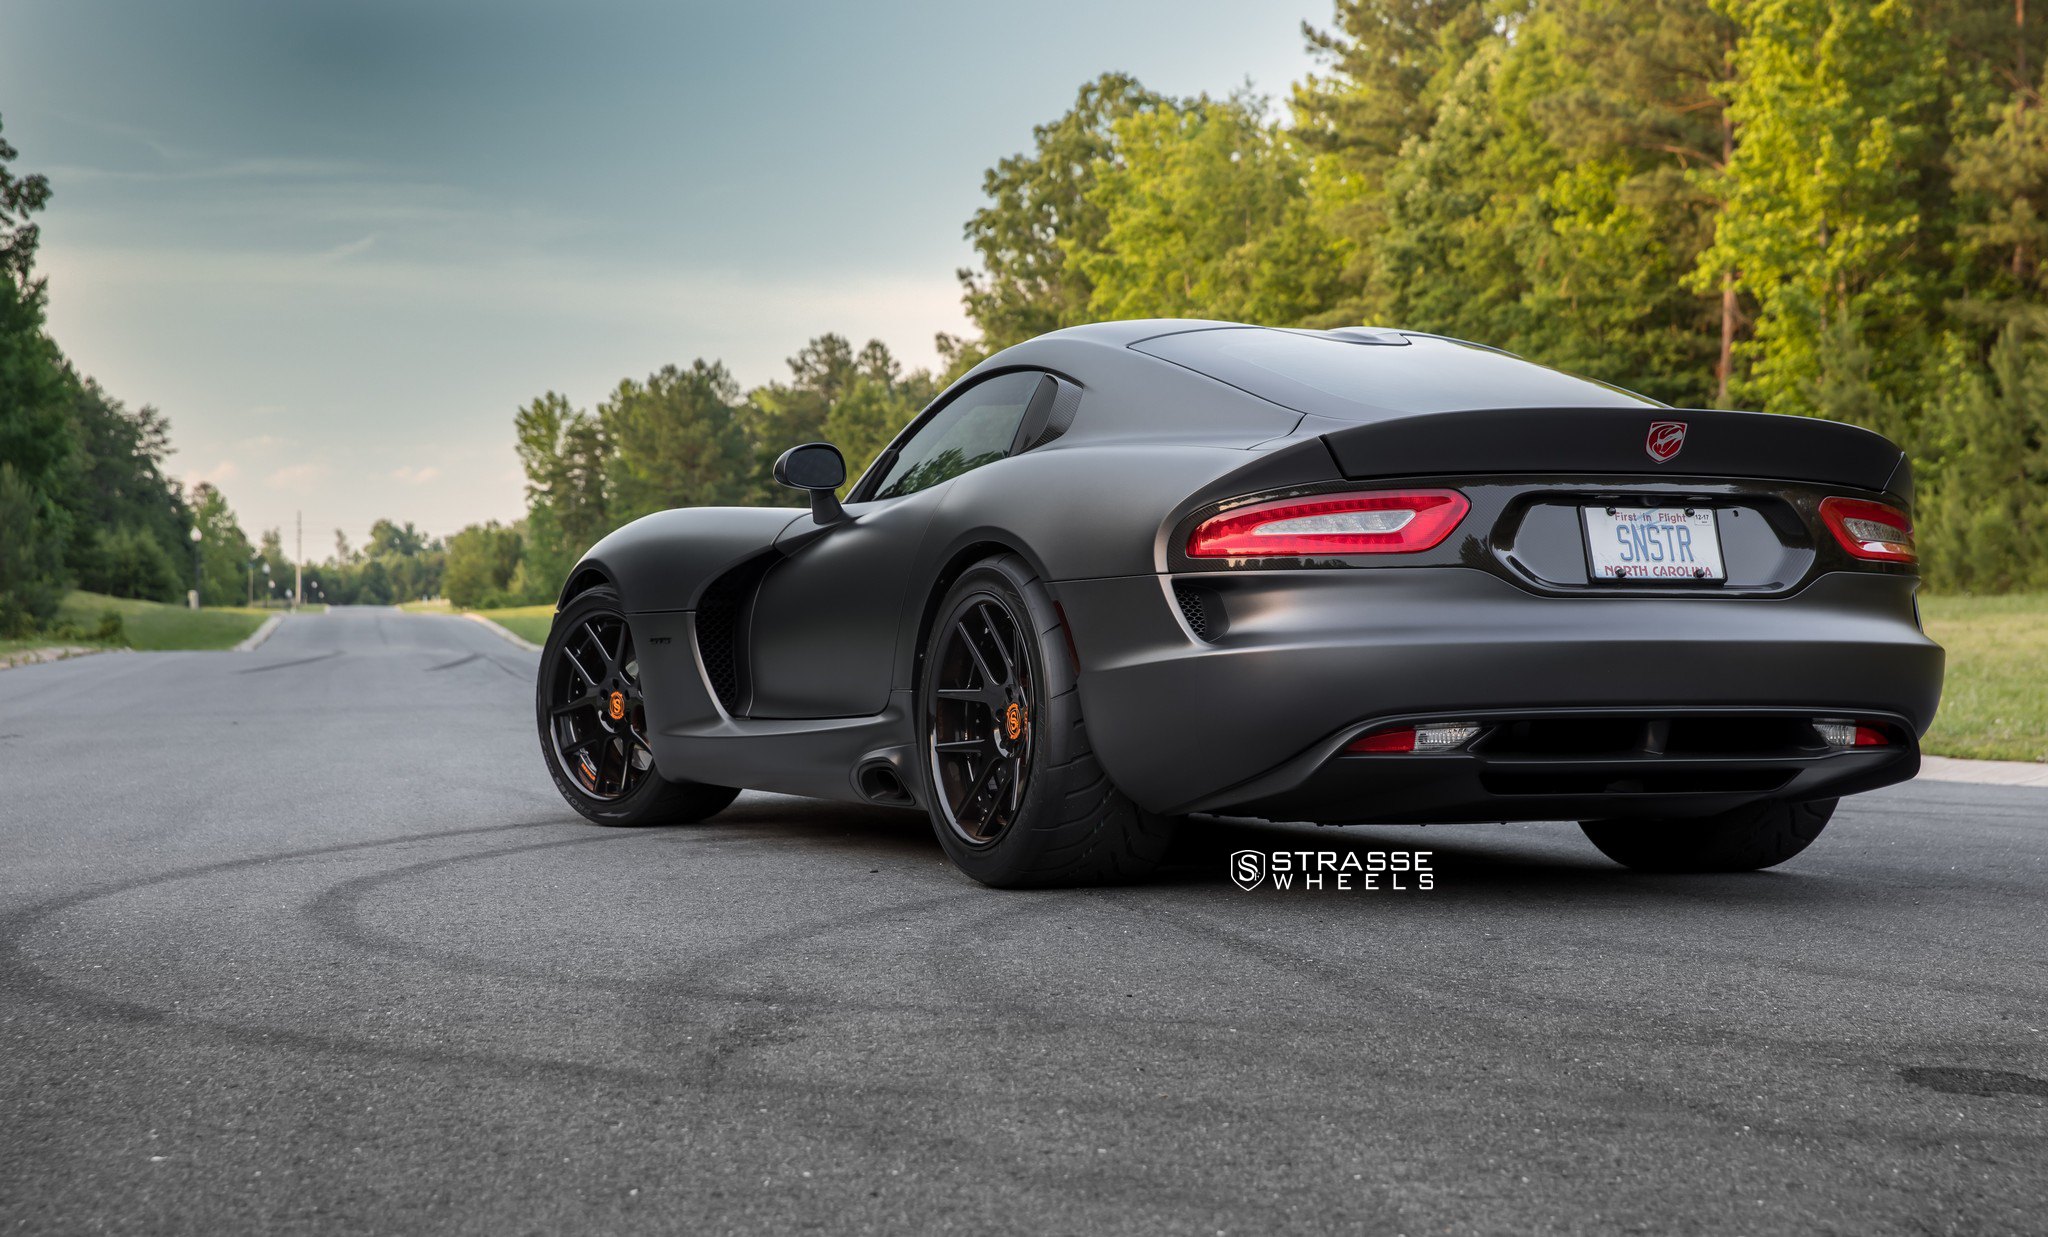 Gray Dodge Viper with Red LED Taillights - Photo by Strasse Forged